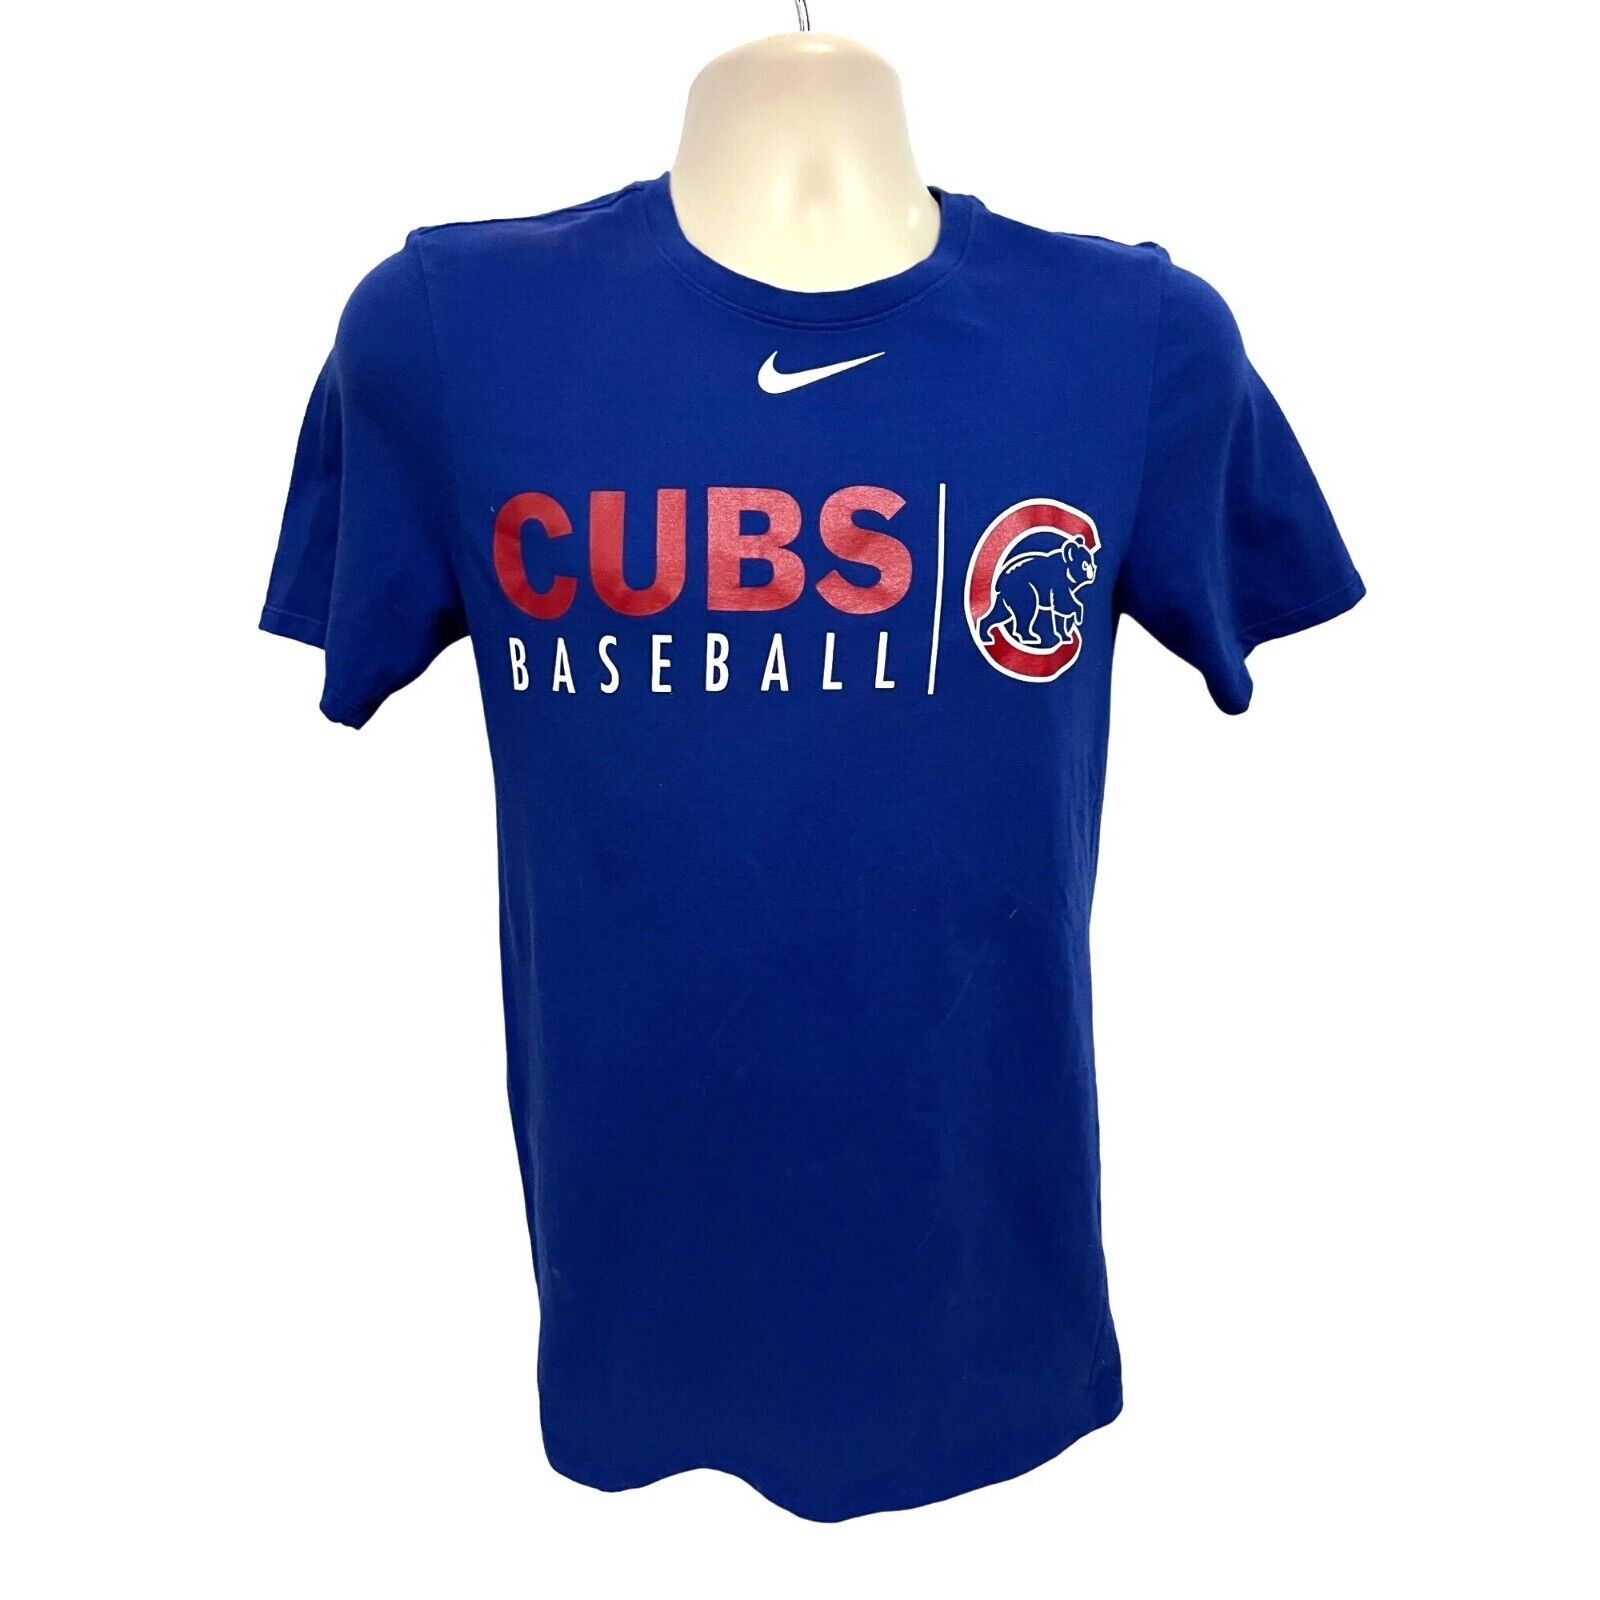 The Nike Tee Dri-Fit Chicago Cubs MLB Baseball Blue Graphic Tee Small Stretch - $19.79